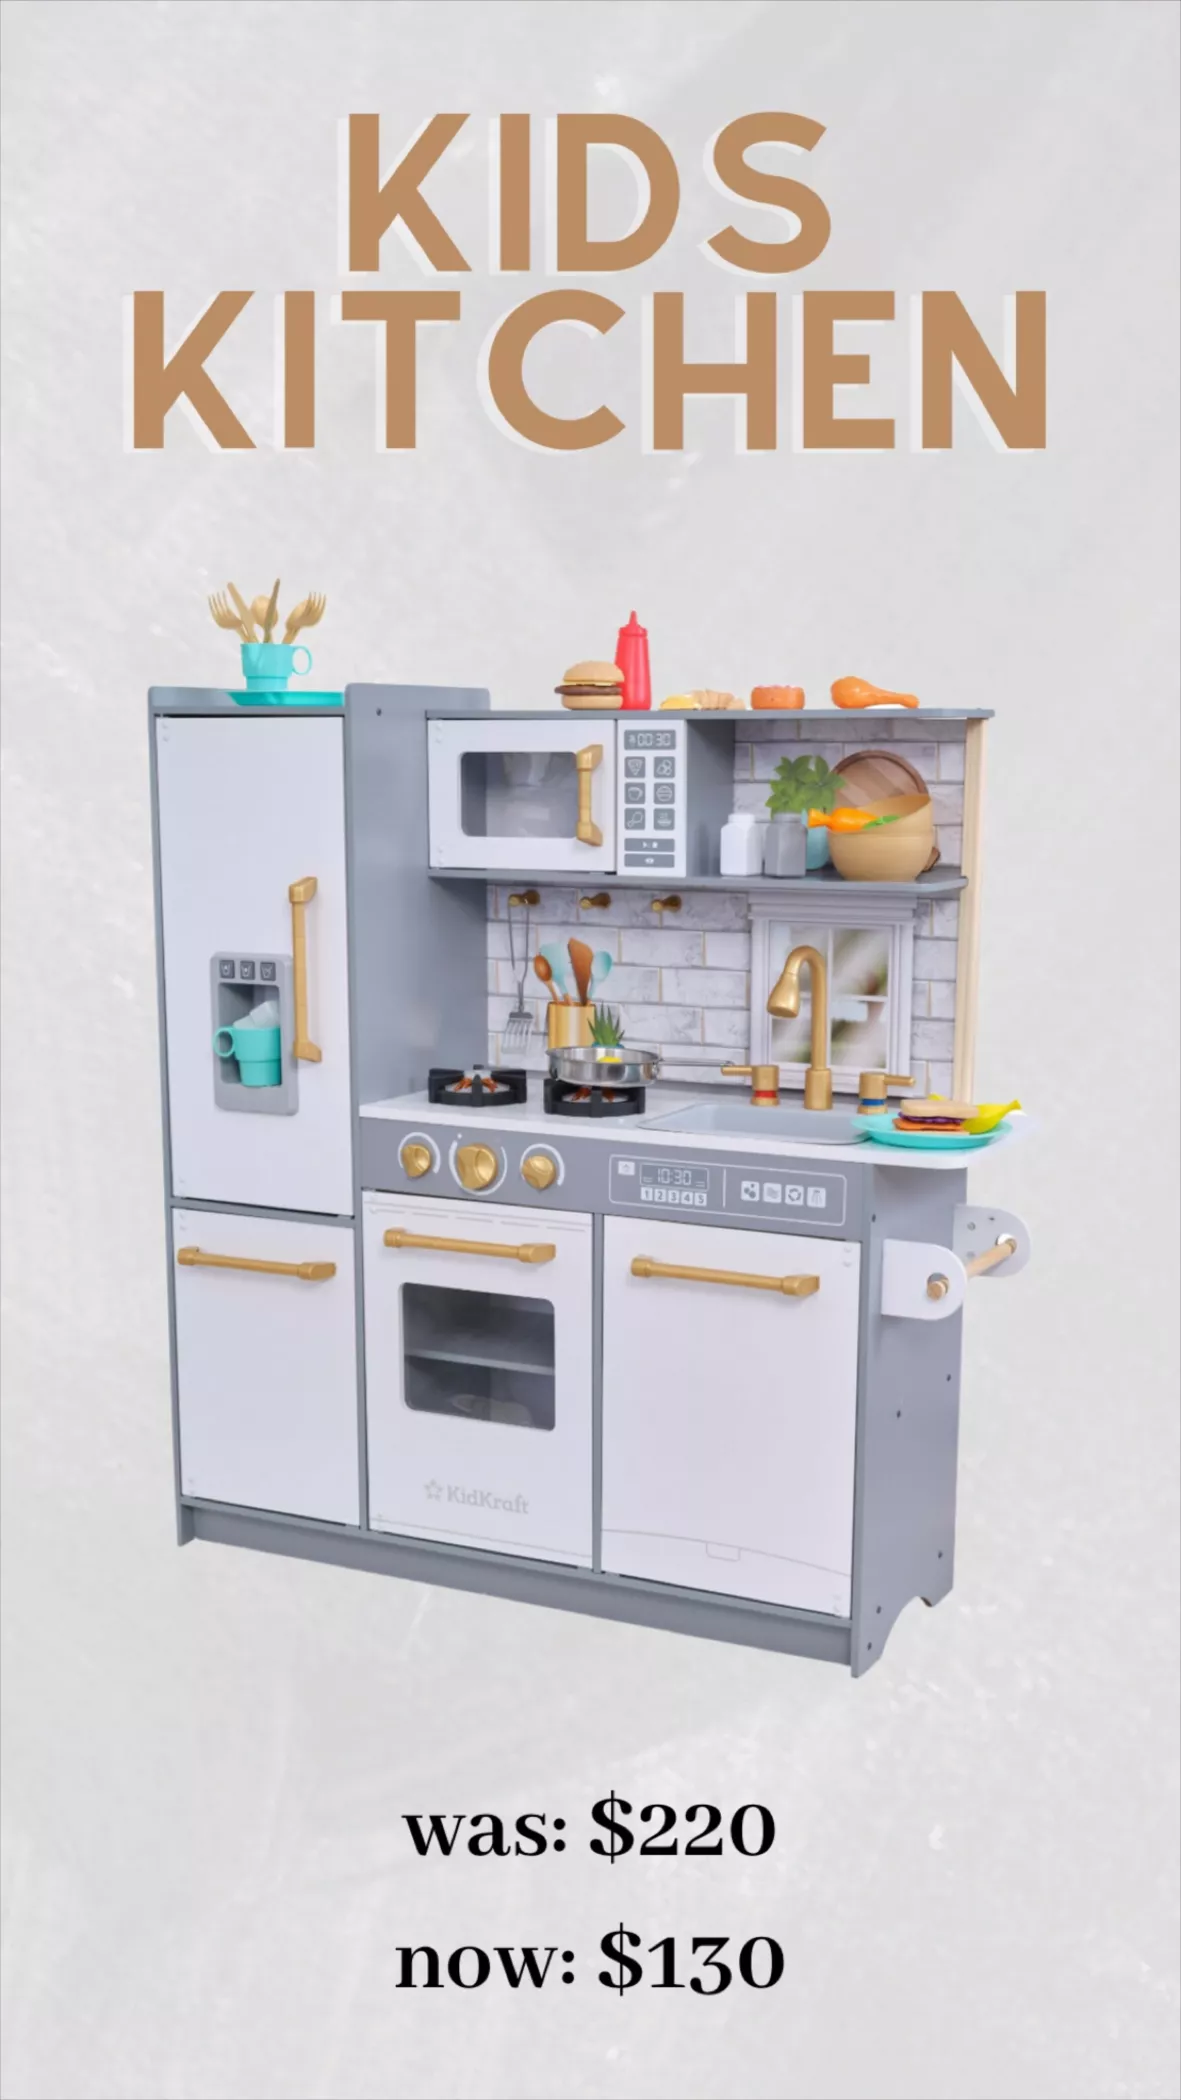 Transform Your Kitchen with Fun Kitchen Gifts! — Perpetual Kid